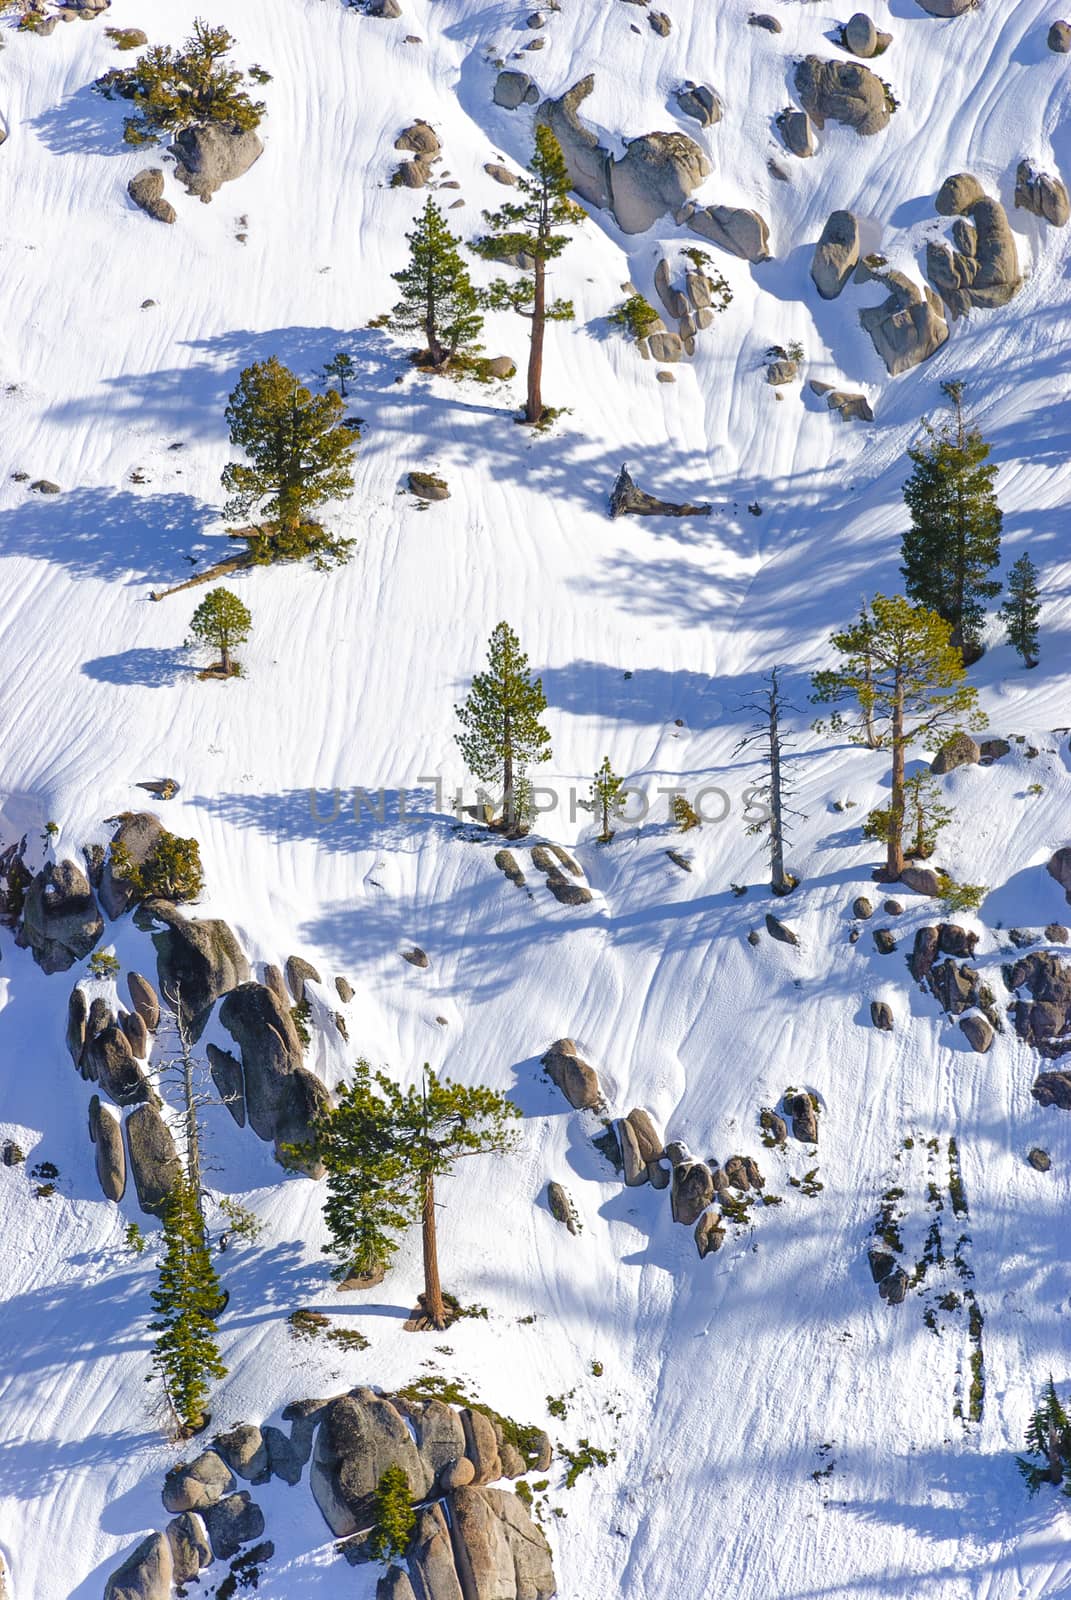 One of the slopes at Squaw Valley, California, for those who like extreme skiing between rocks and trees.